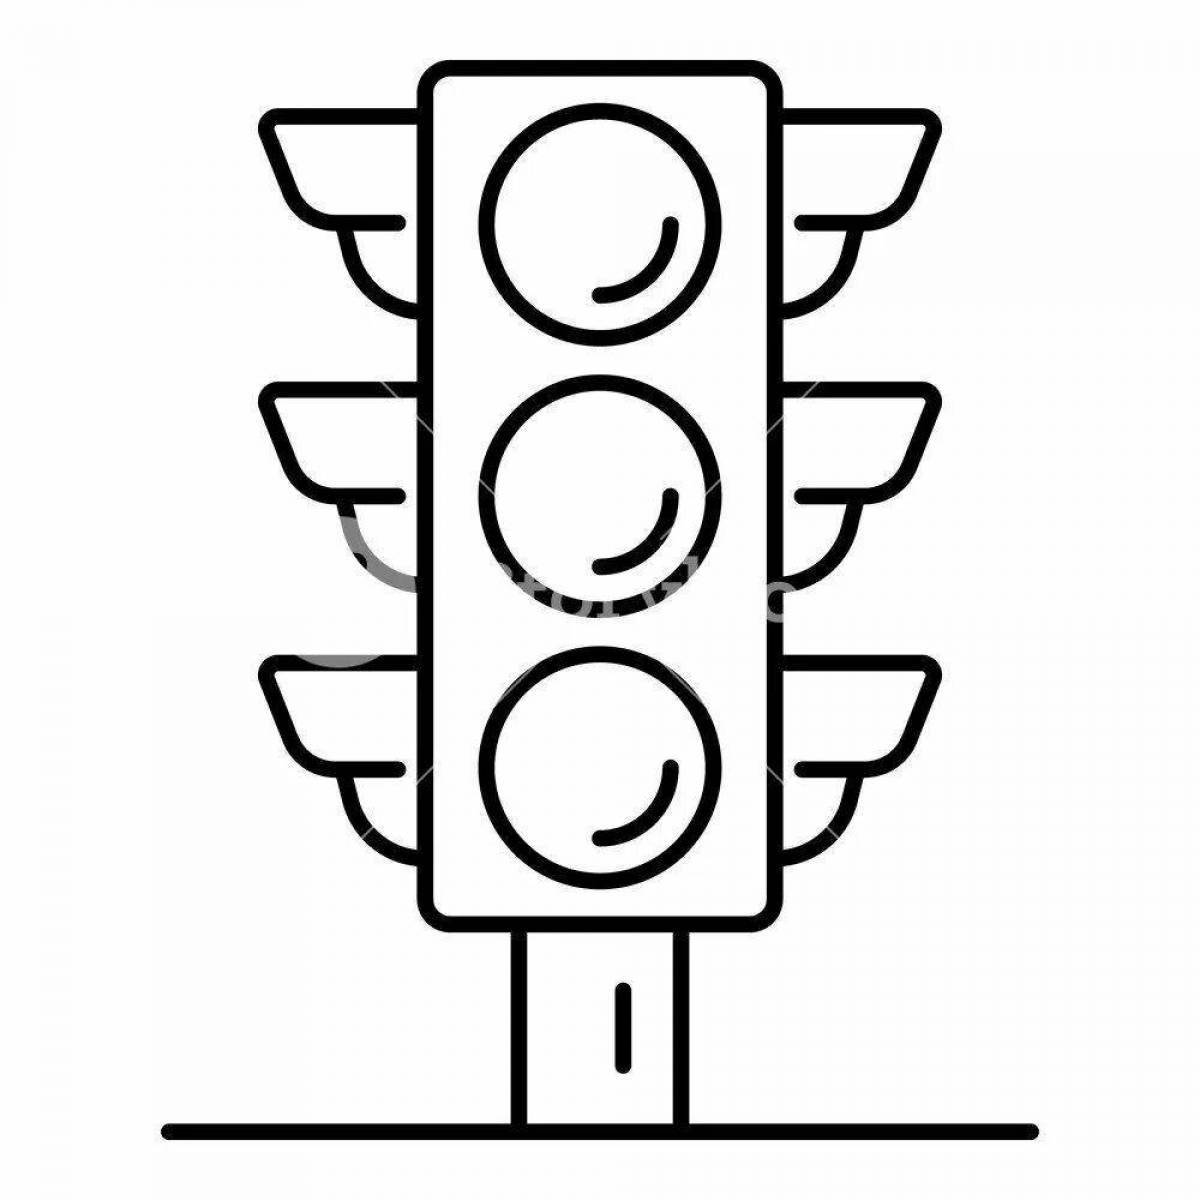 Charming coloring of our familiar traffic light